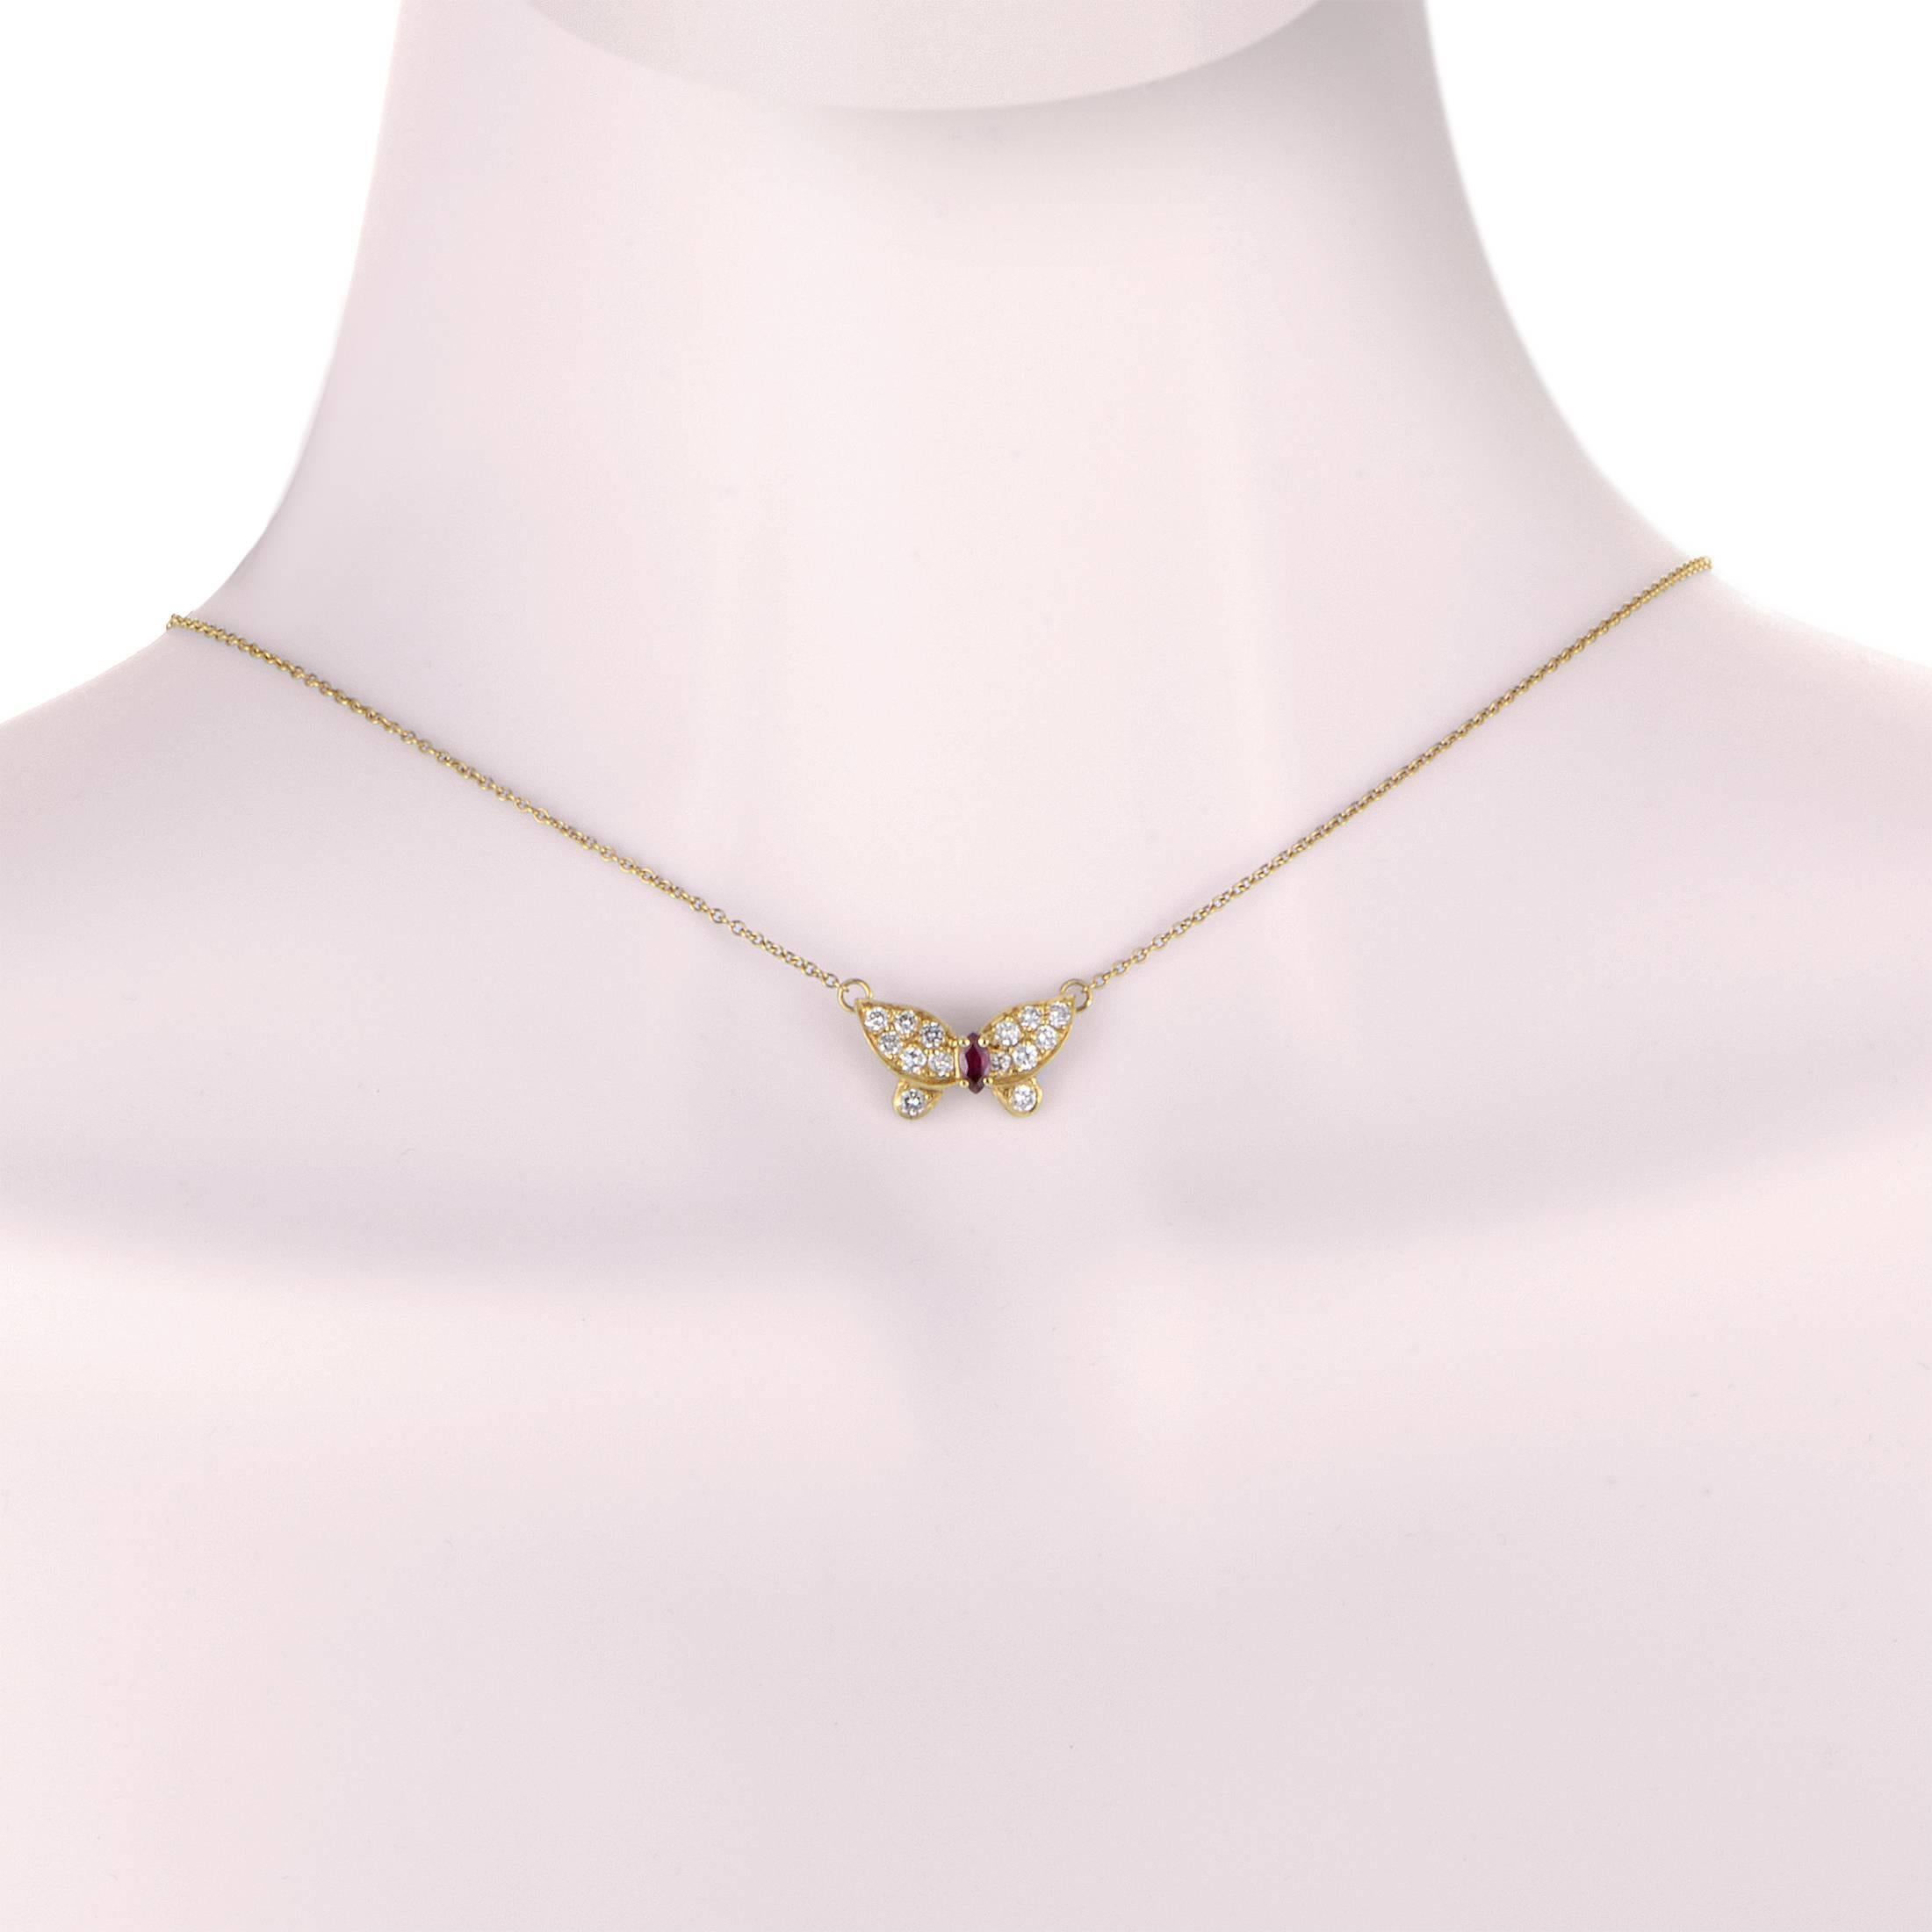 Once again turning to nature for inspiration and expertly translating that captivating beauty into a luxurious item, Van Cleef & Arpels present this magnificent 18K yellow gold necklace that boasts a butterfly-shaped pendant embellished with